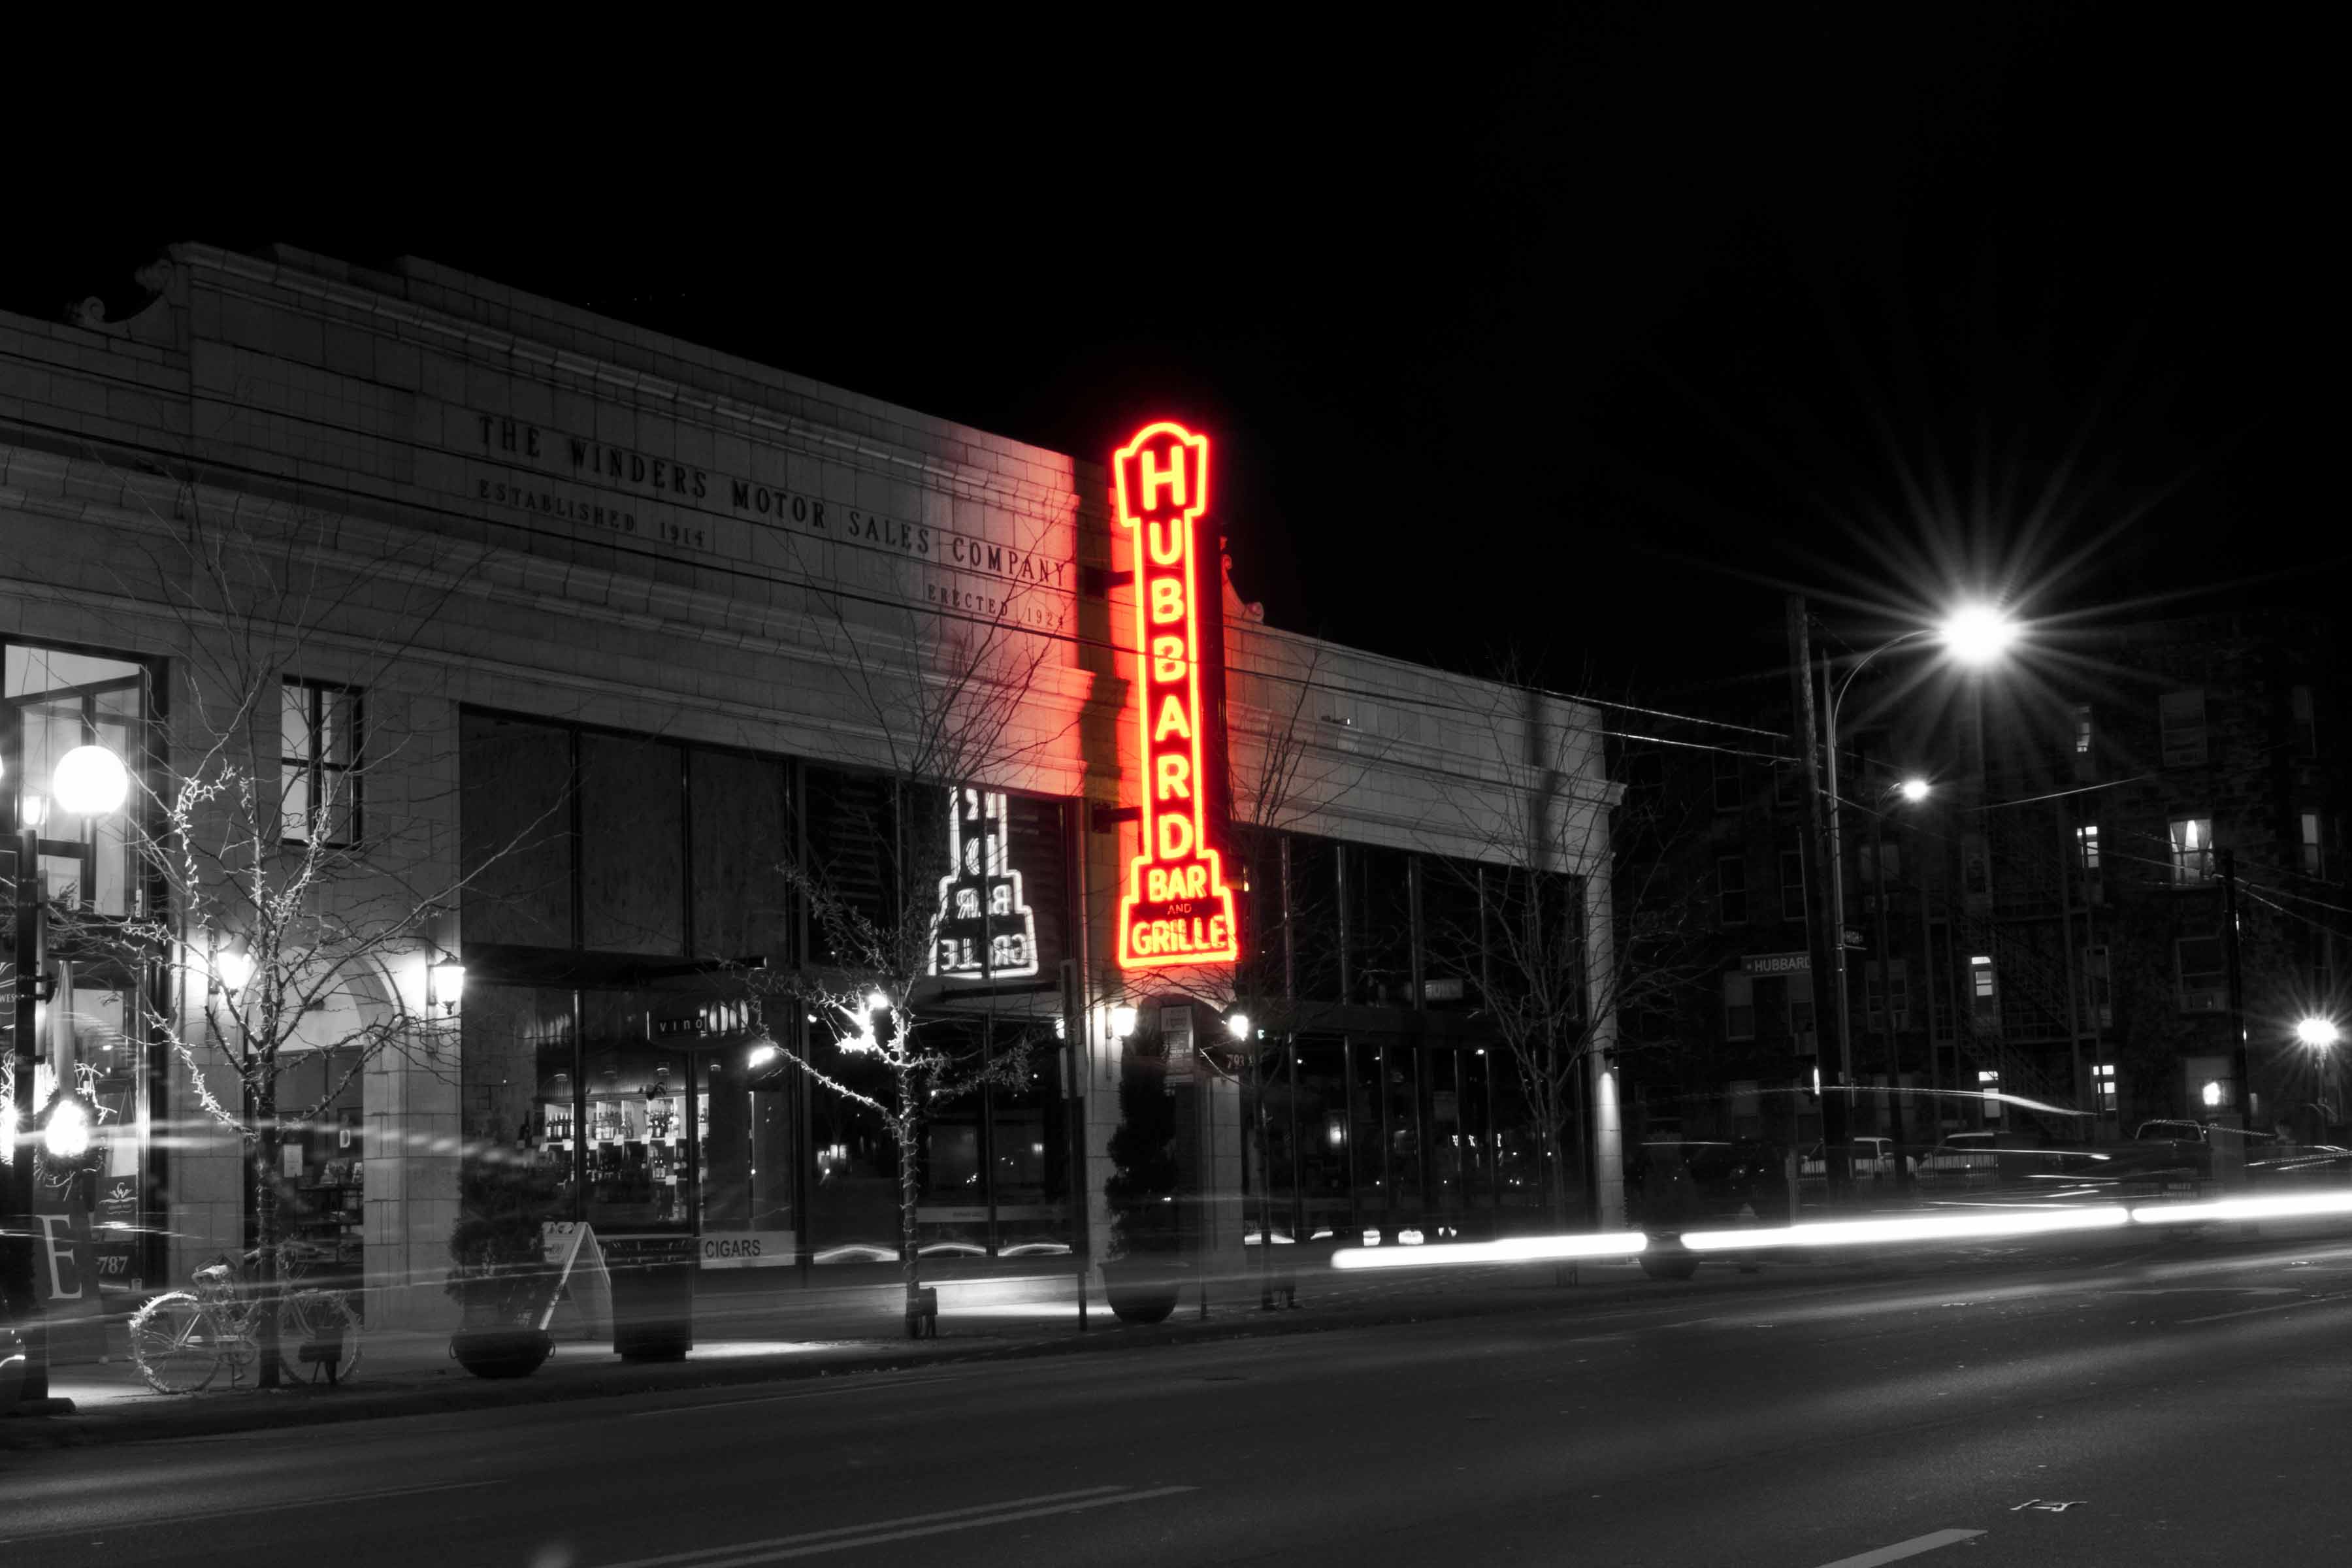 Hubbard Grille sign